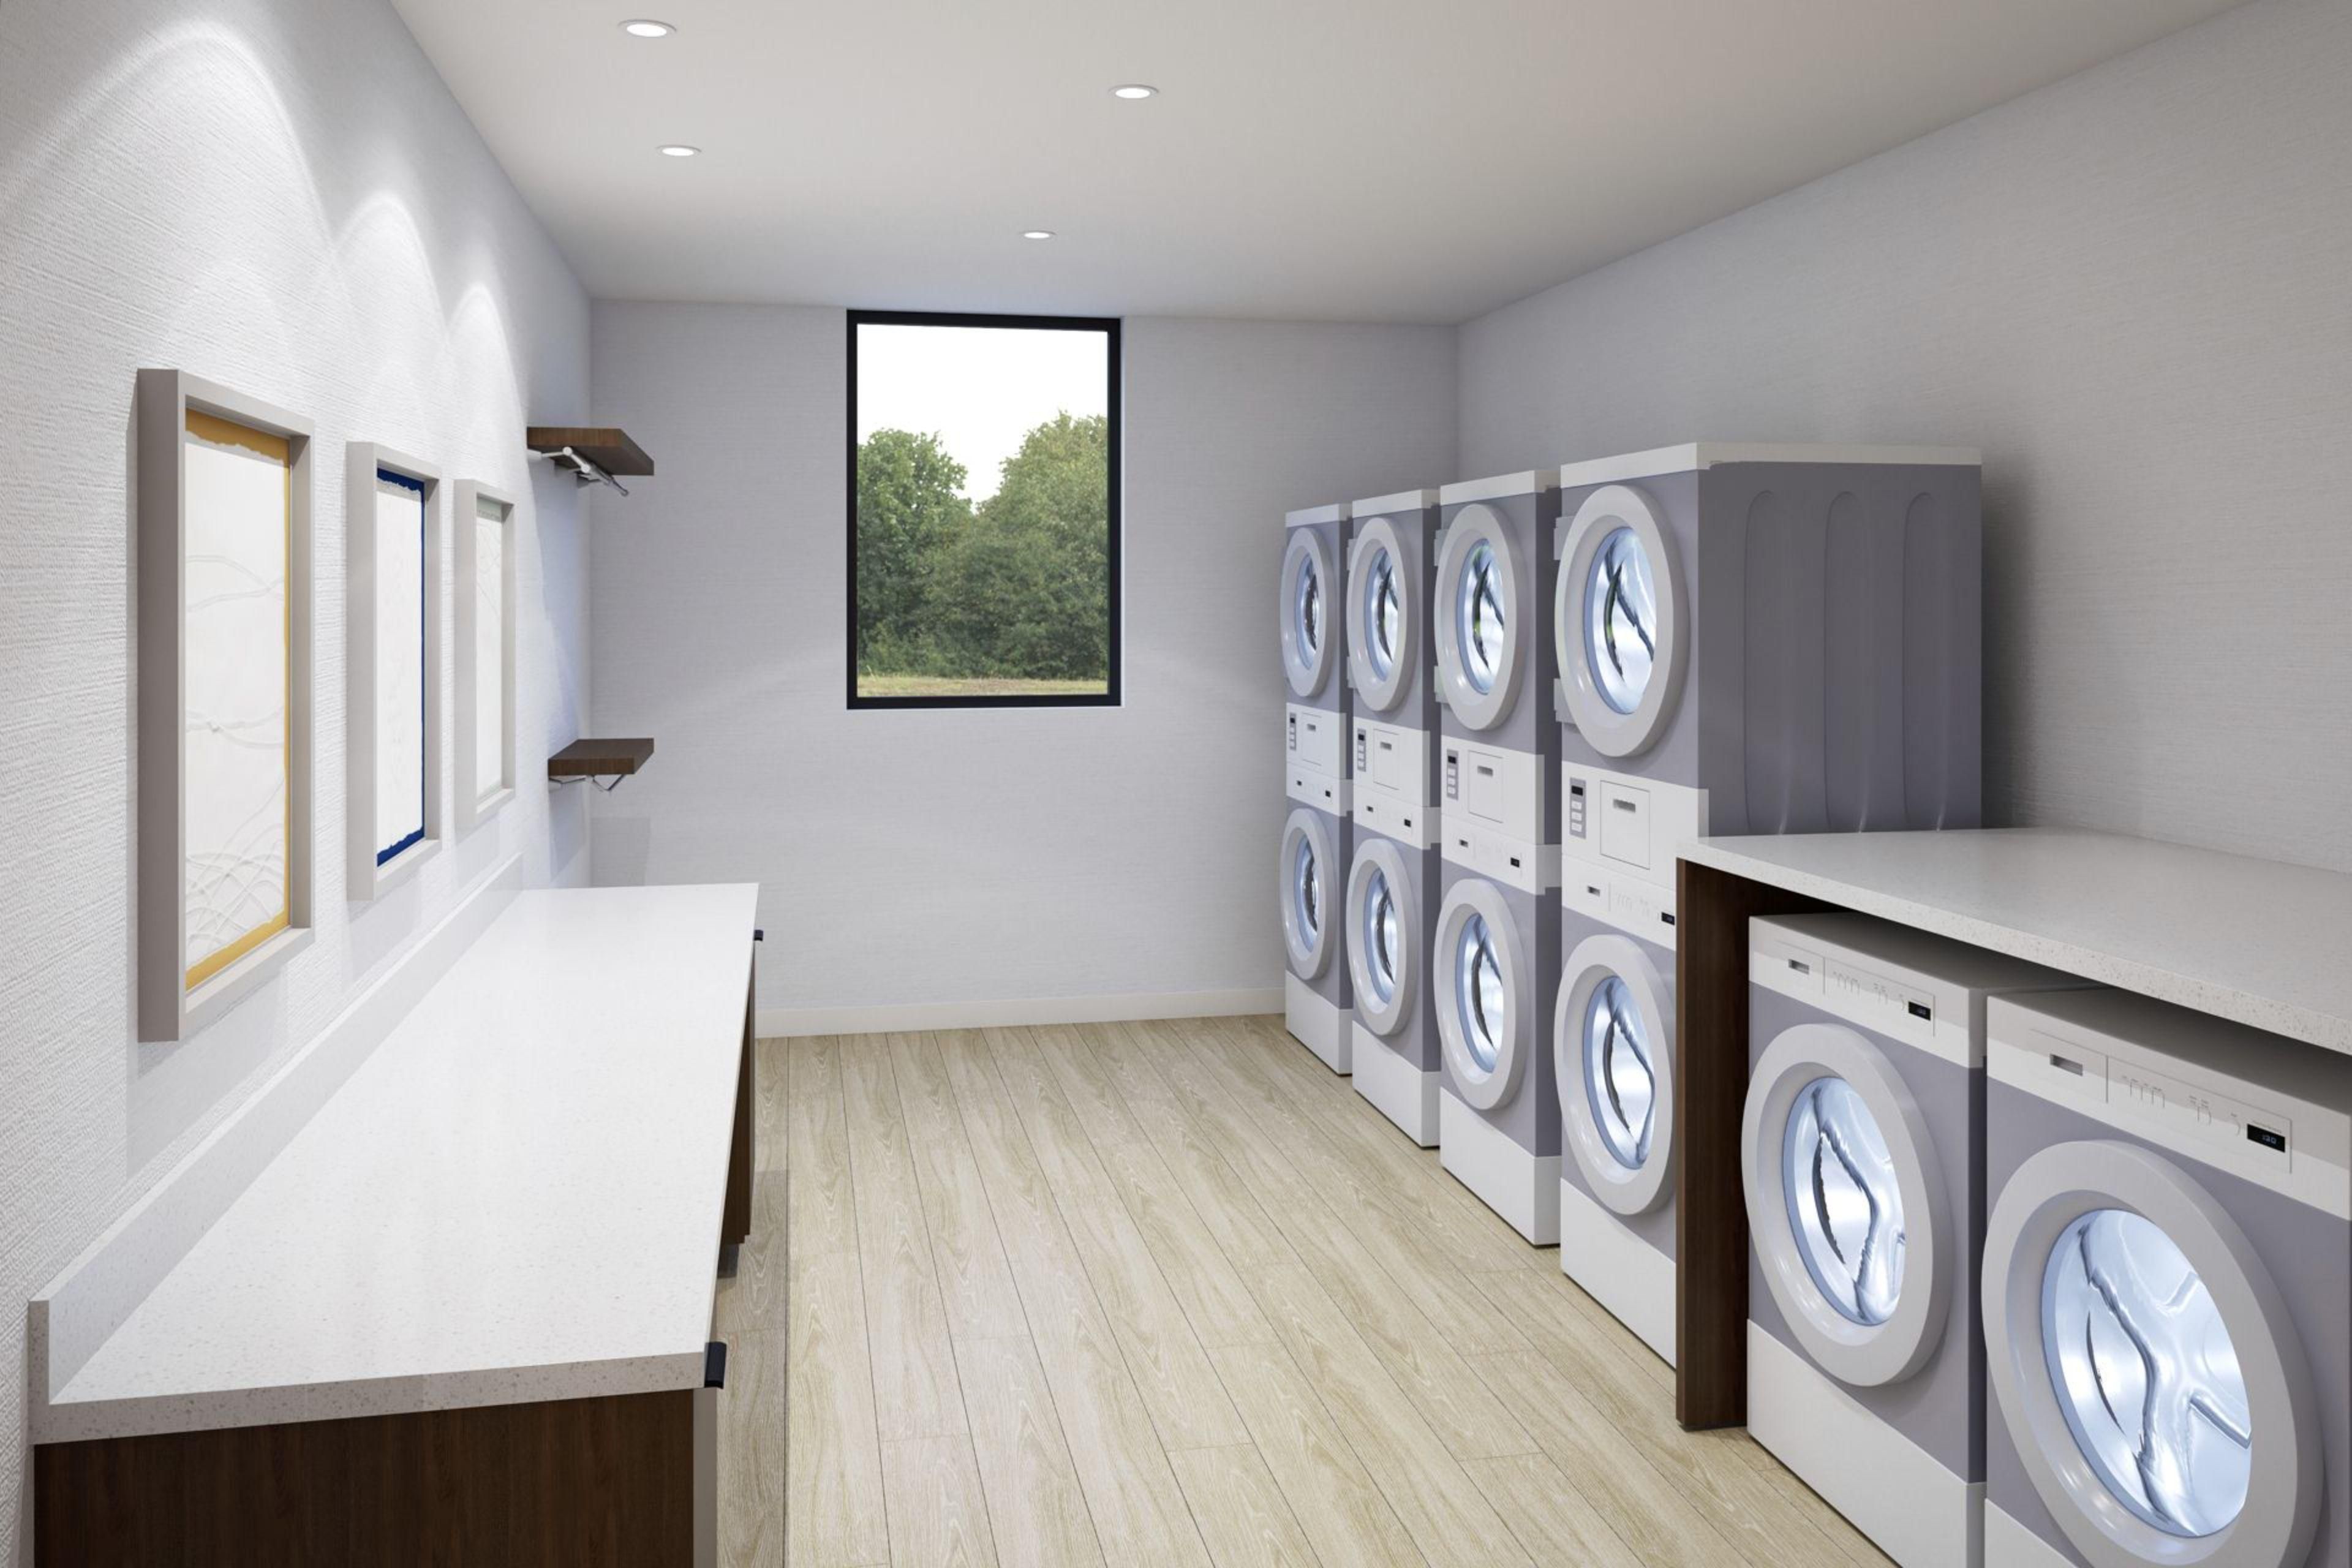 Take advantage of our complimentary washer and dryer during your stay.